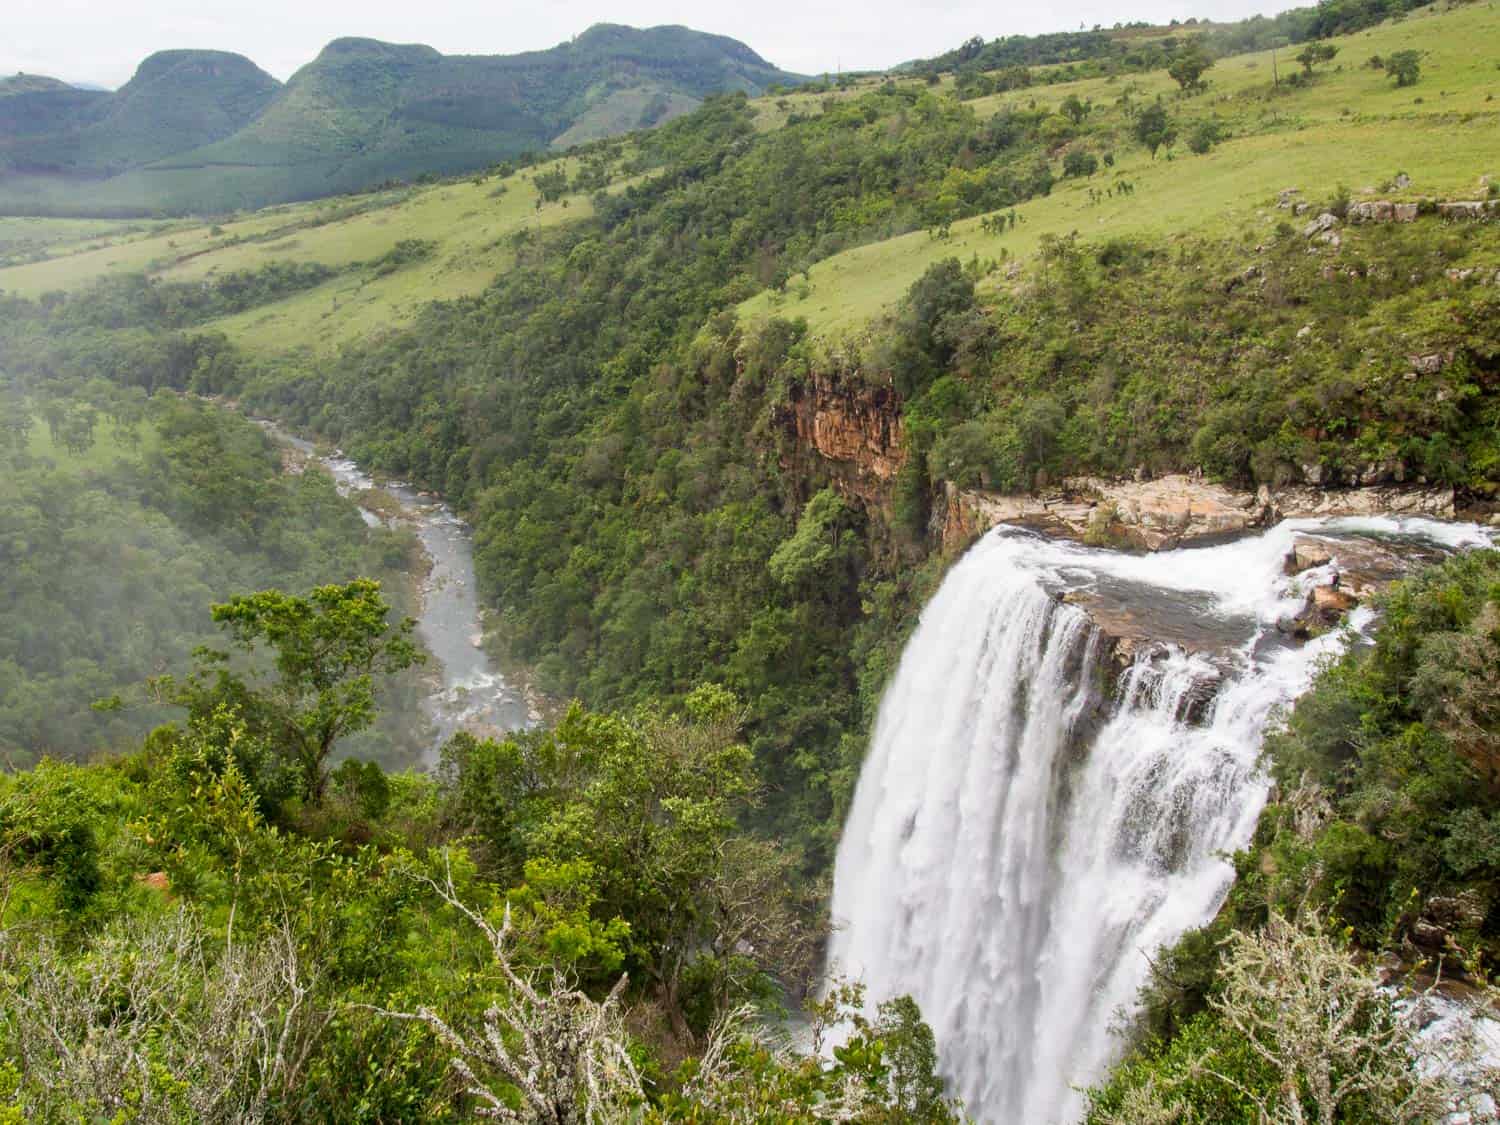 Lisbon Falls on the Panorama Route, our first stop on our South Africa road trip